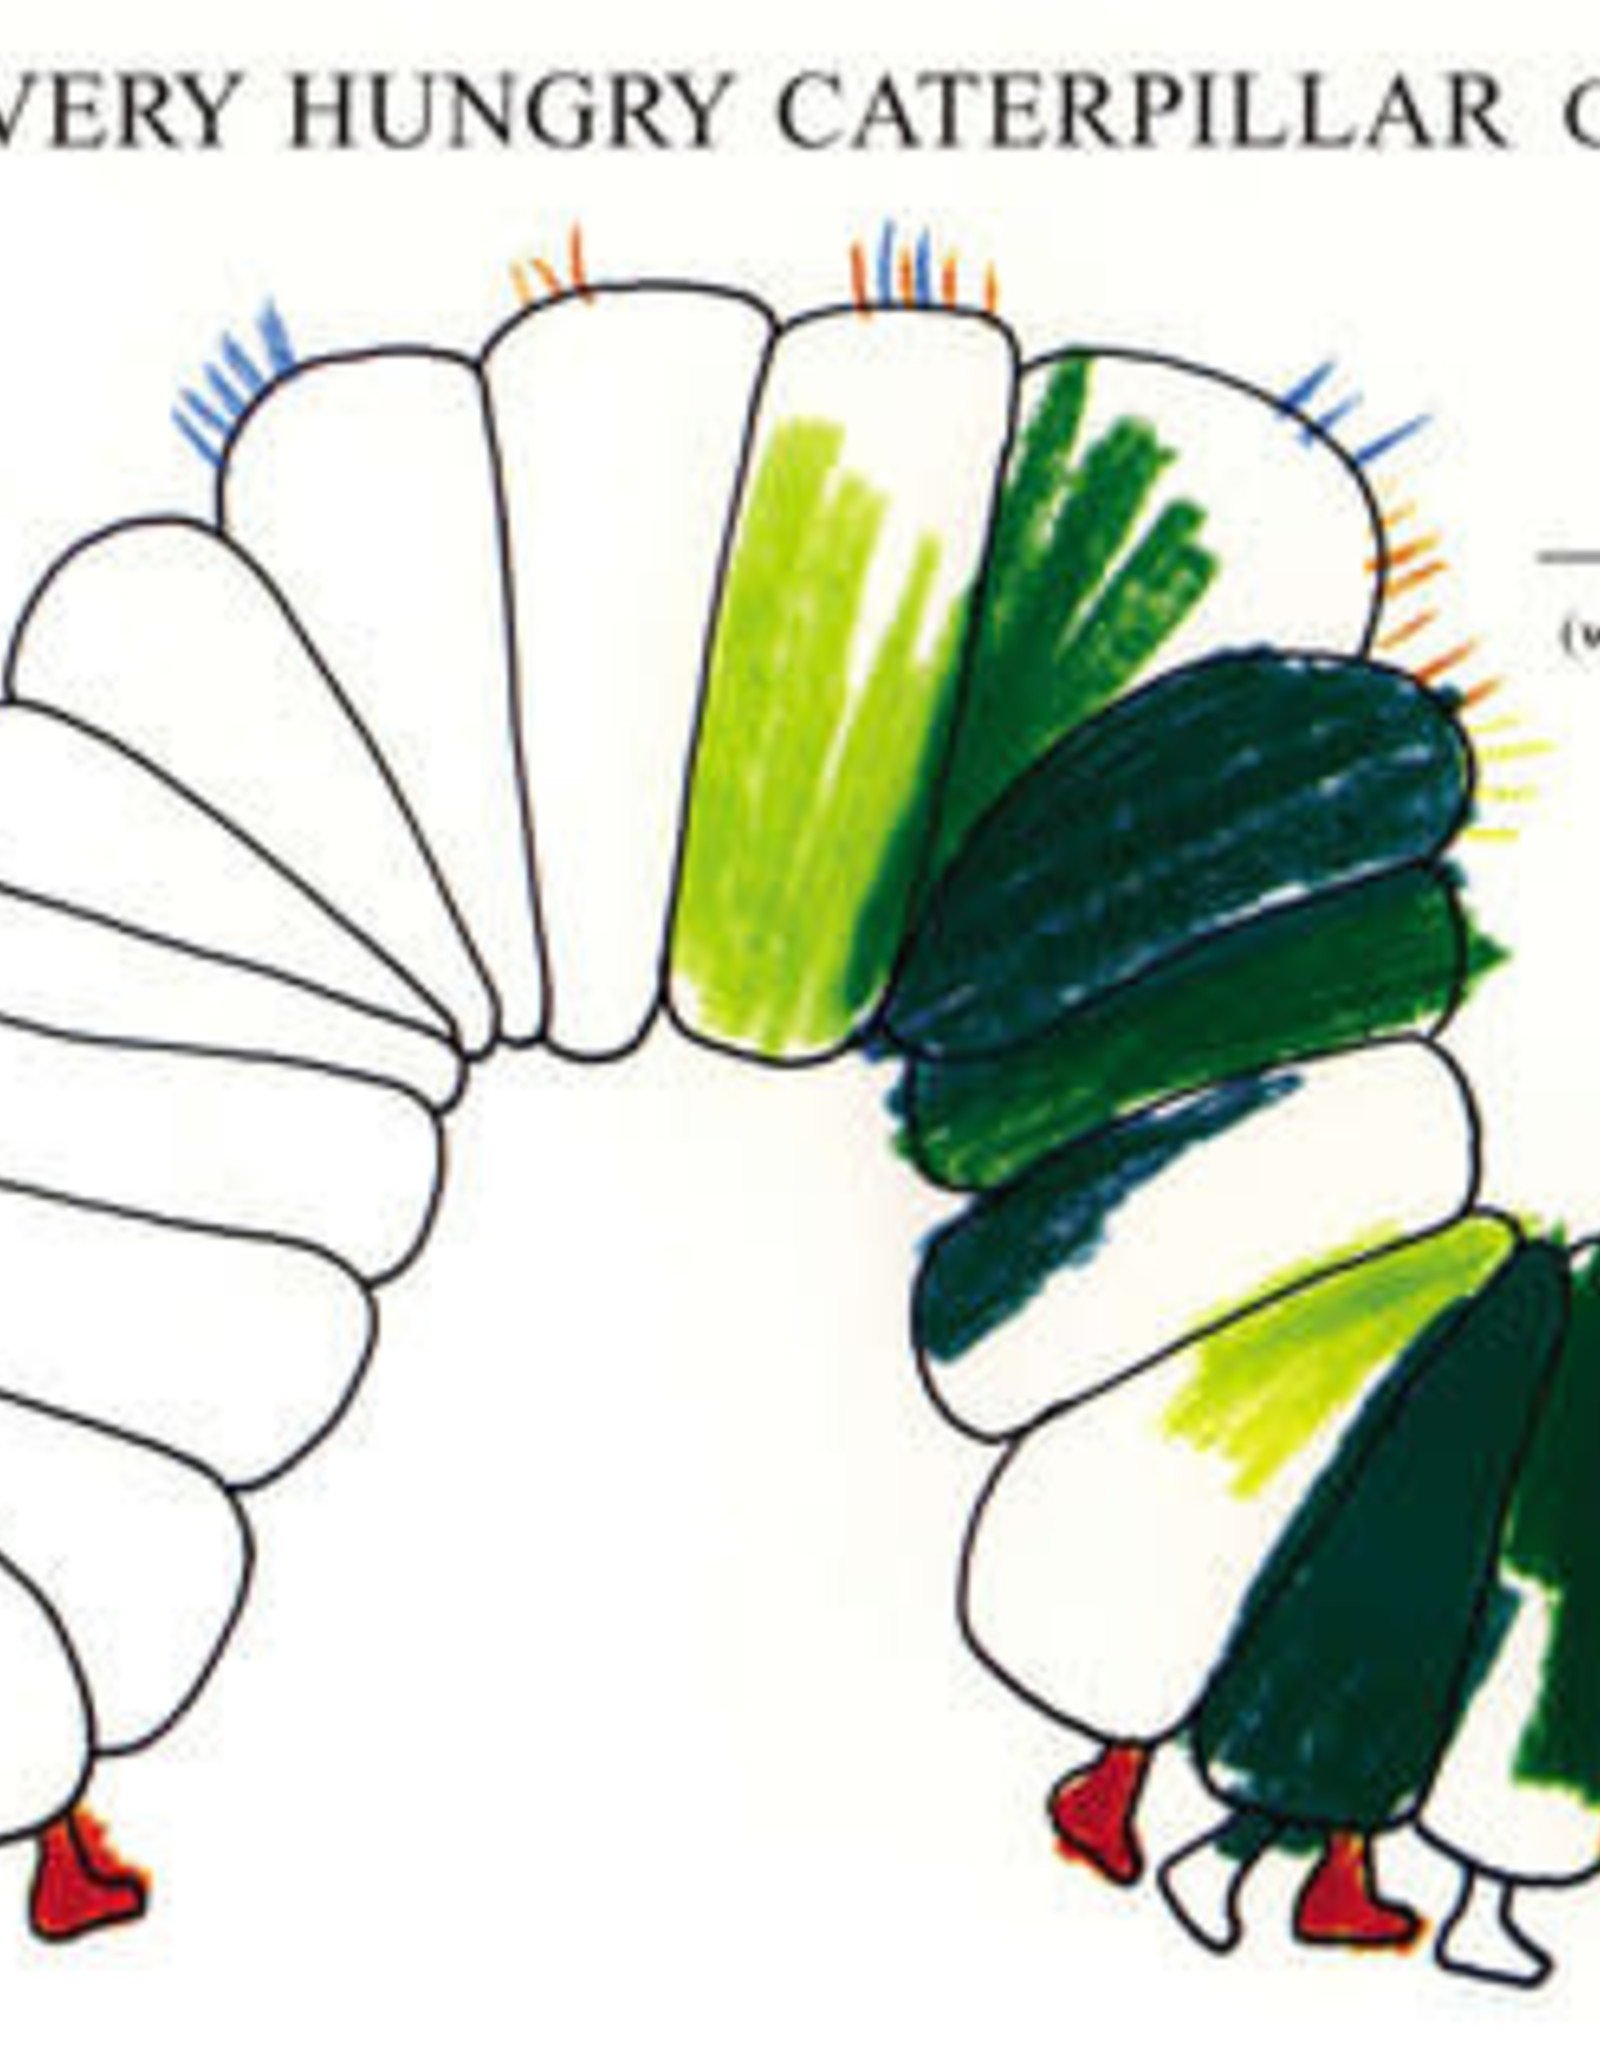 My Own Very Hungry Caterpillar Coloring Book